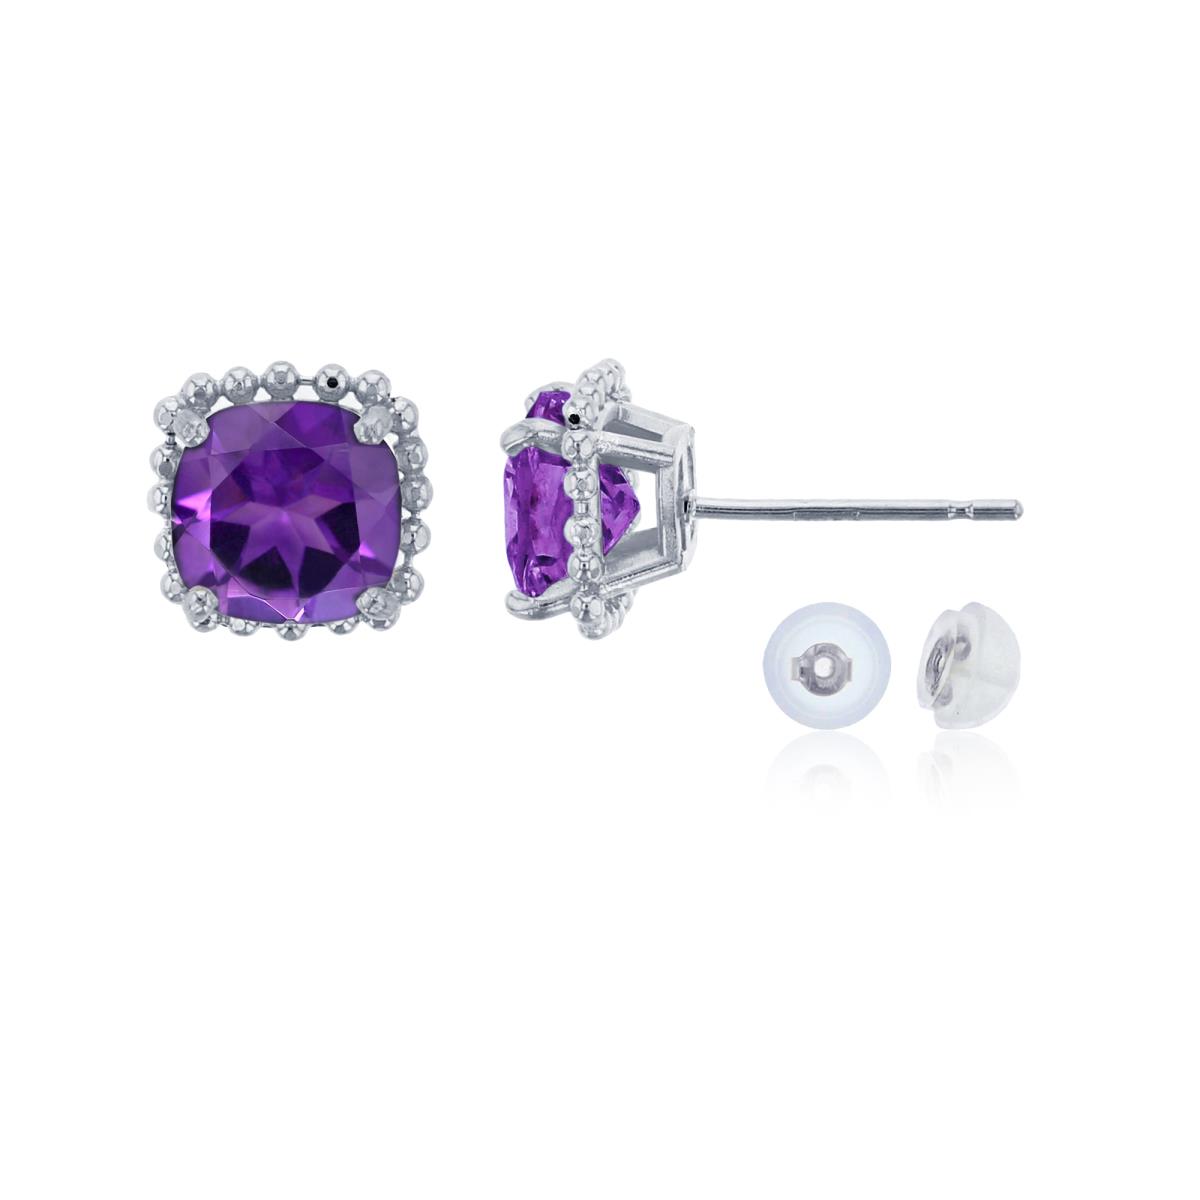 10K White Gold 6x6mm Cushion Cut Amethyst Bead Frame Stud Earring with Silicone Back